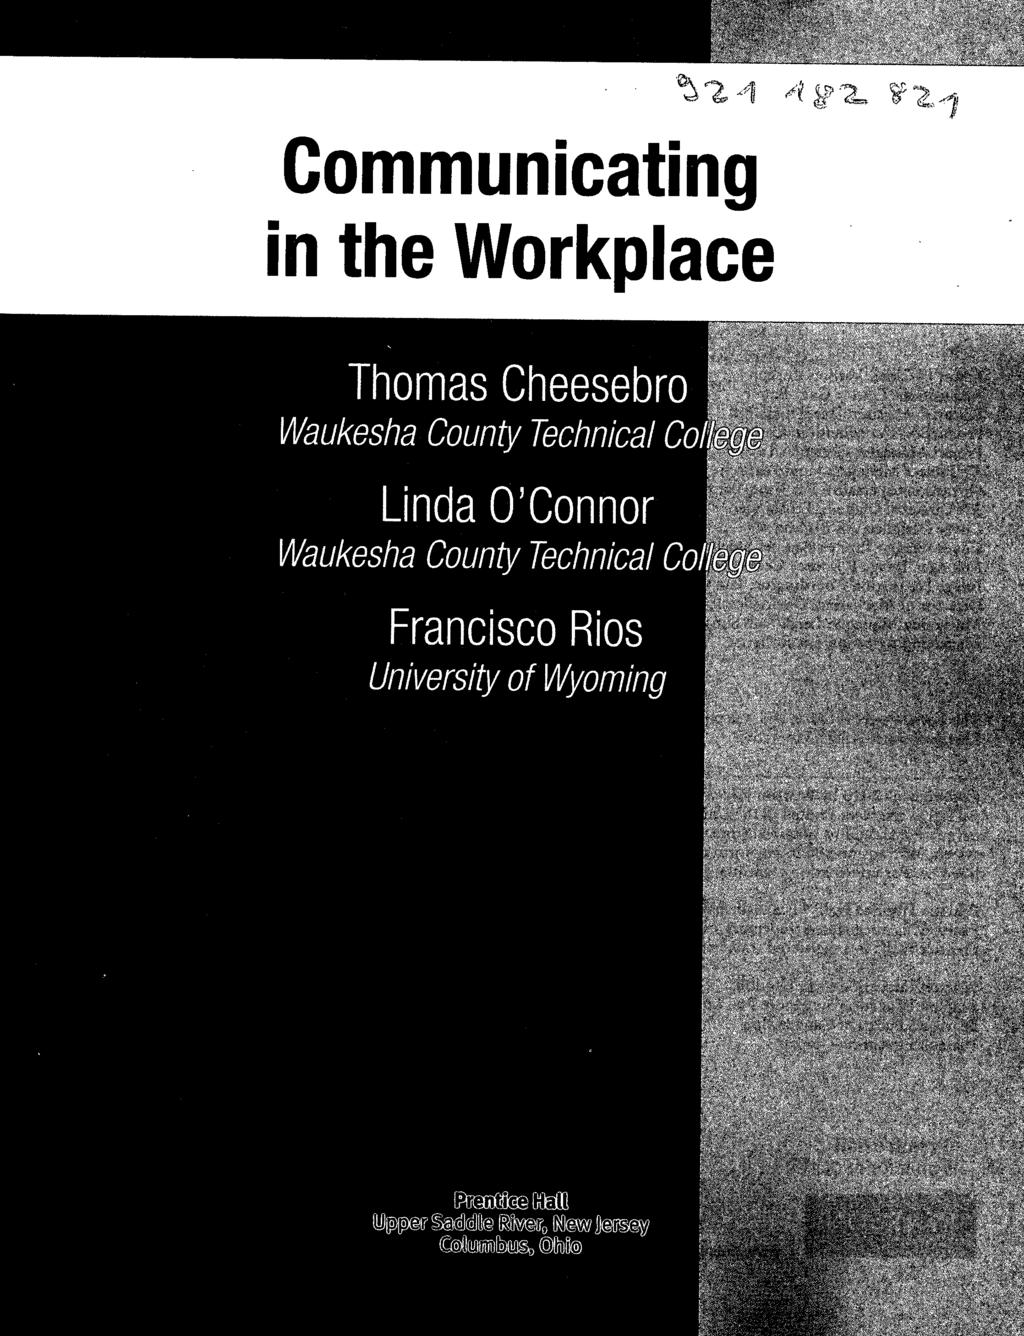 Communicating in the Workplace Thomas Cheesebro Waukesha County Technical Coi